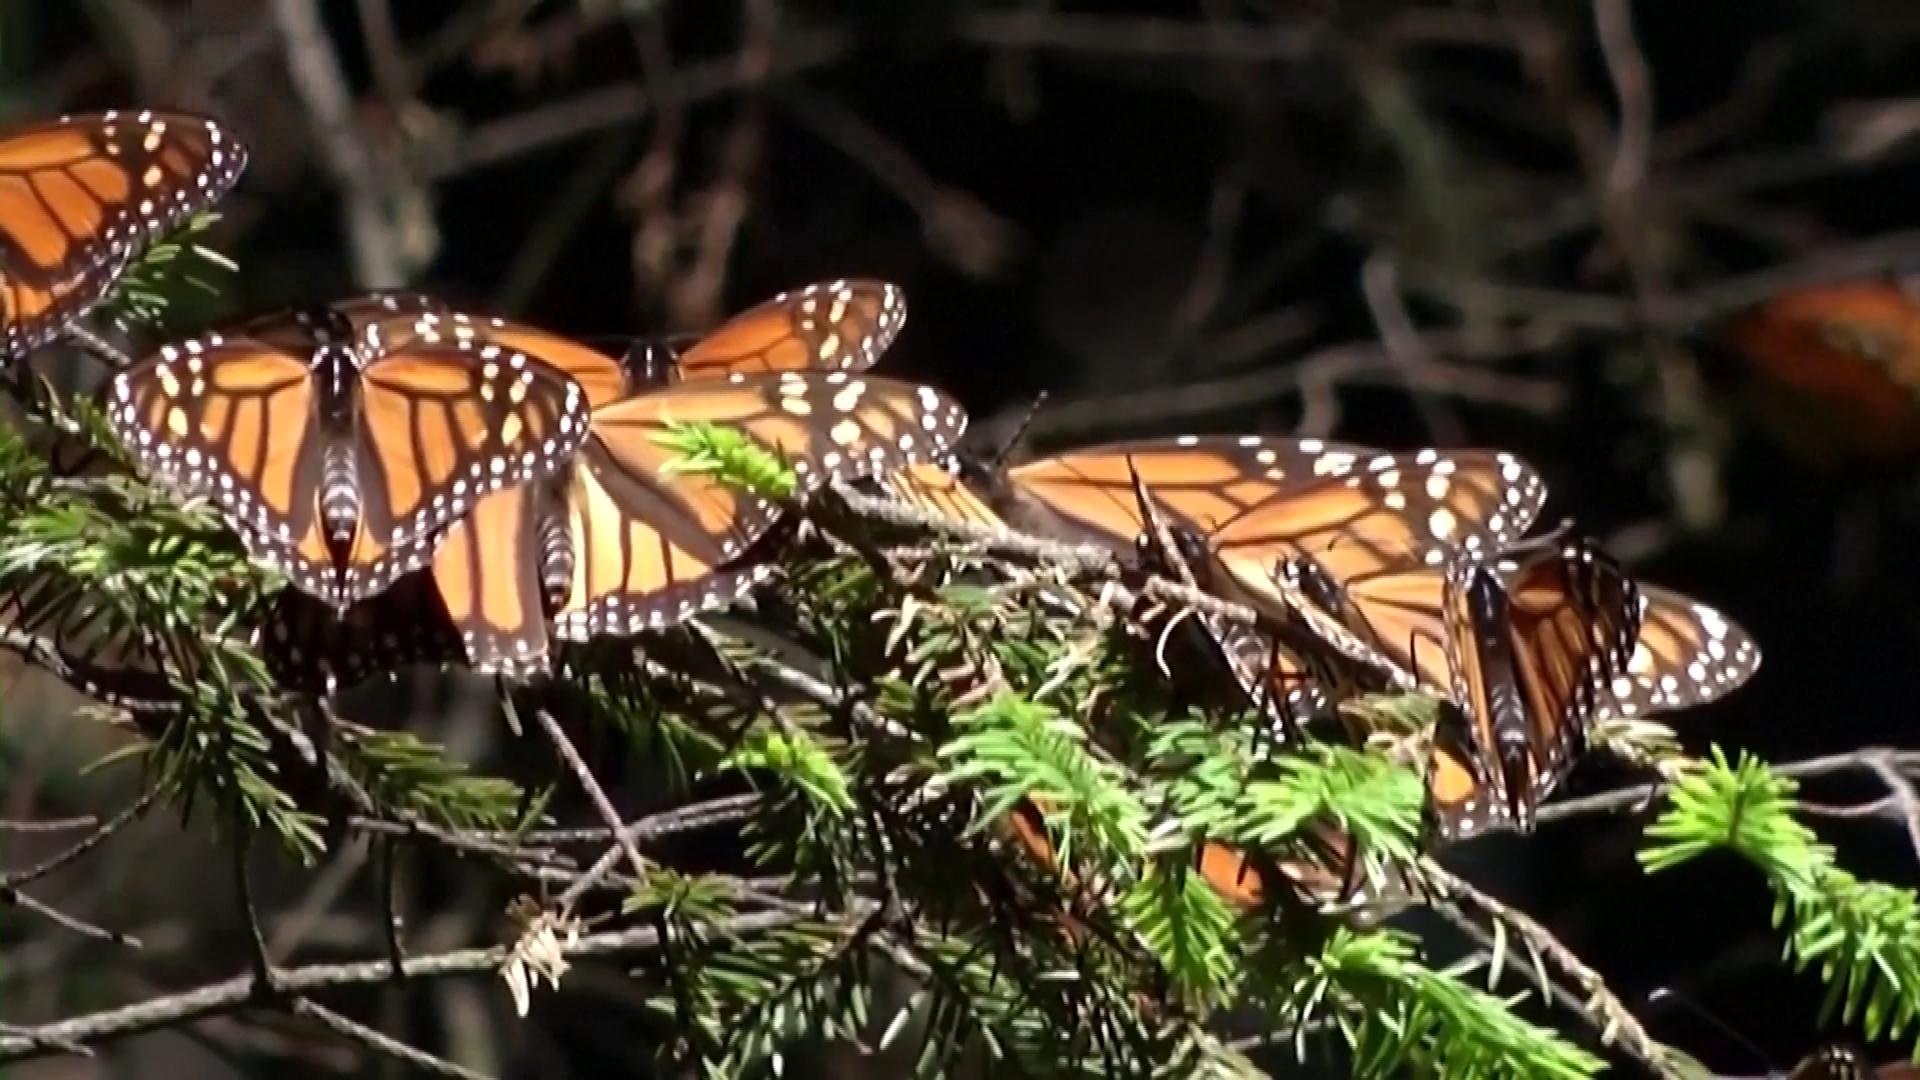 Monarch butterflies are now an endangered species. Here's how